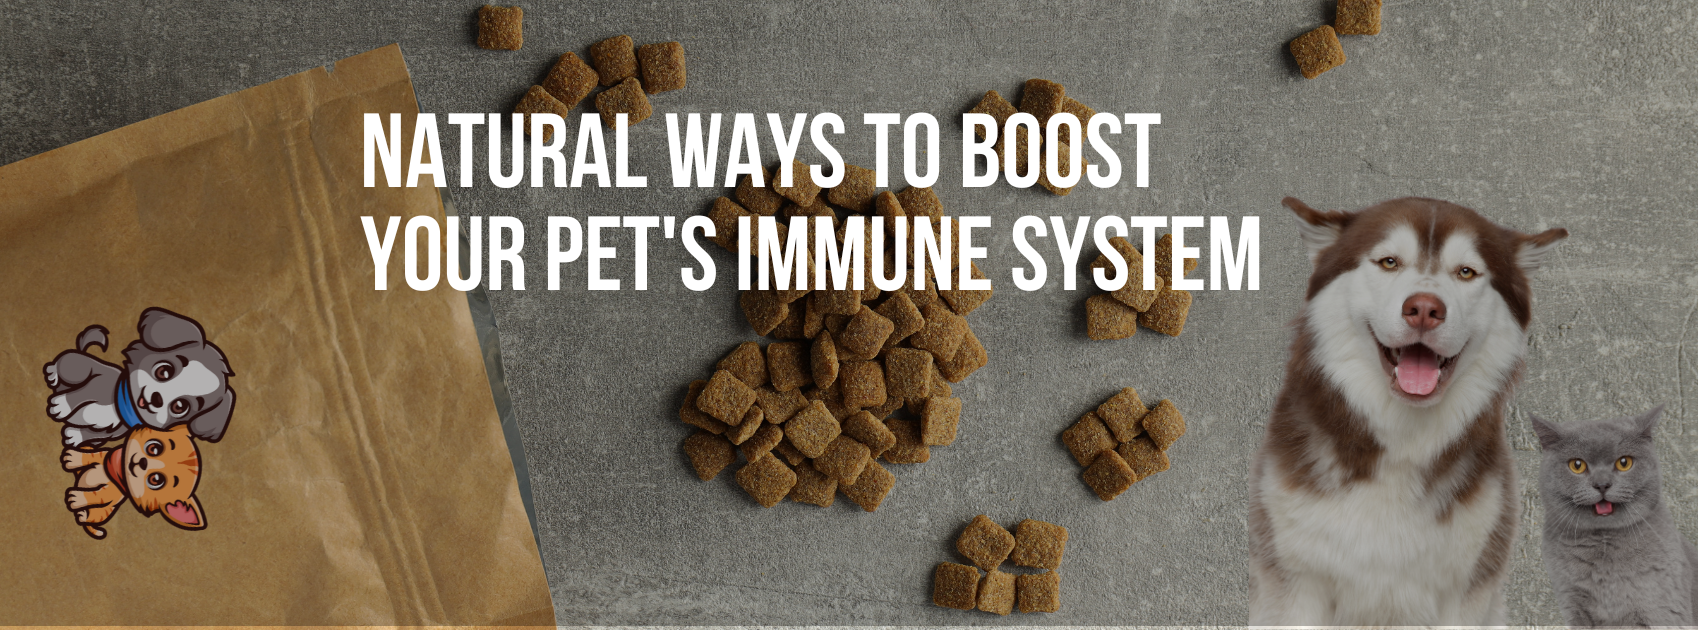 Natural Ways to Boost Your Pet's Immune System